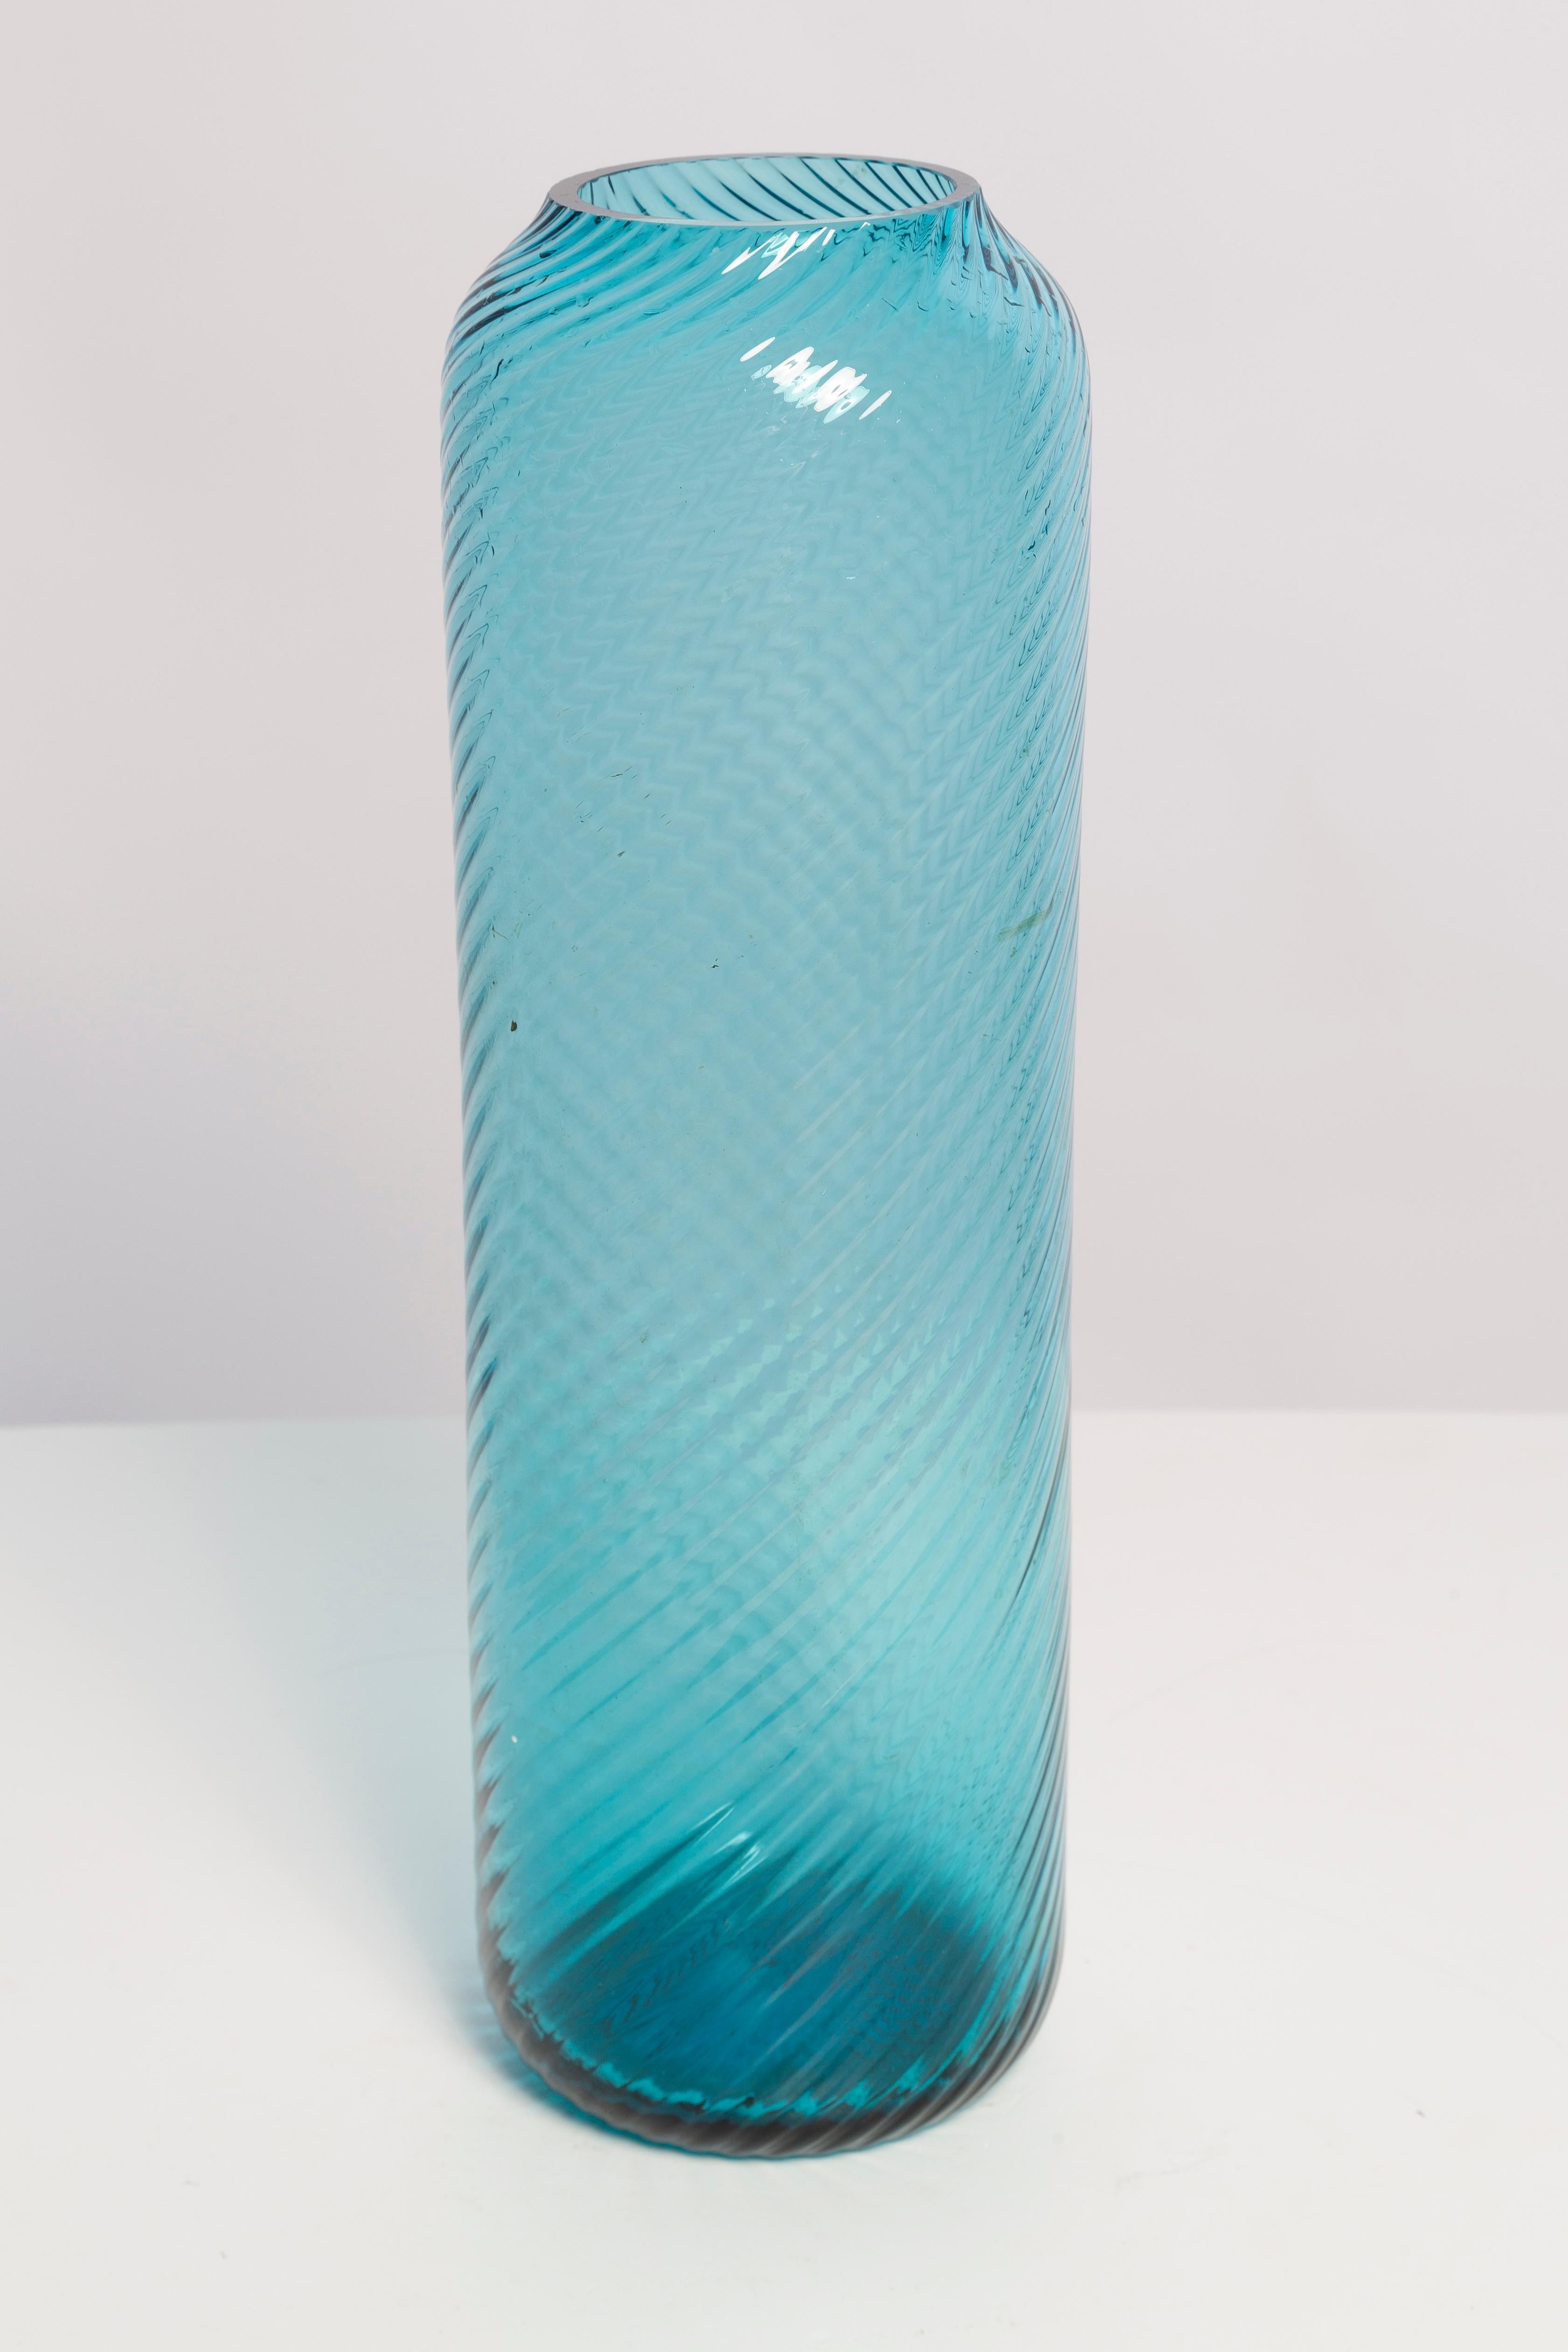 Blue vase in amazing shape. Produced in 1960s.
Glass in perfect condition. The vase looks like it has just been taken out of the box.

No jags, defects etc. The outer relief surface, the inner smooth. 
Thick glass vase, massive.

The irregular